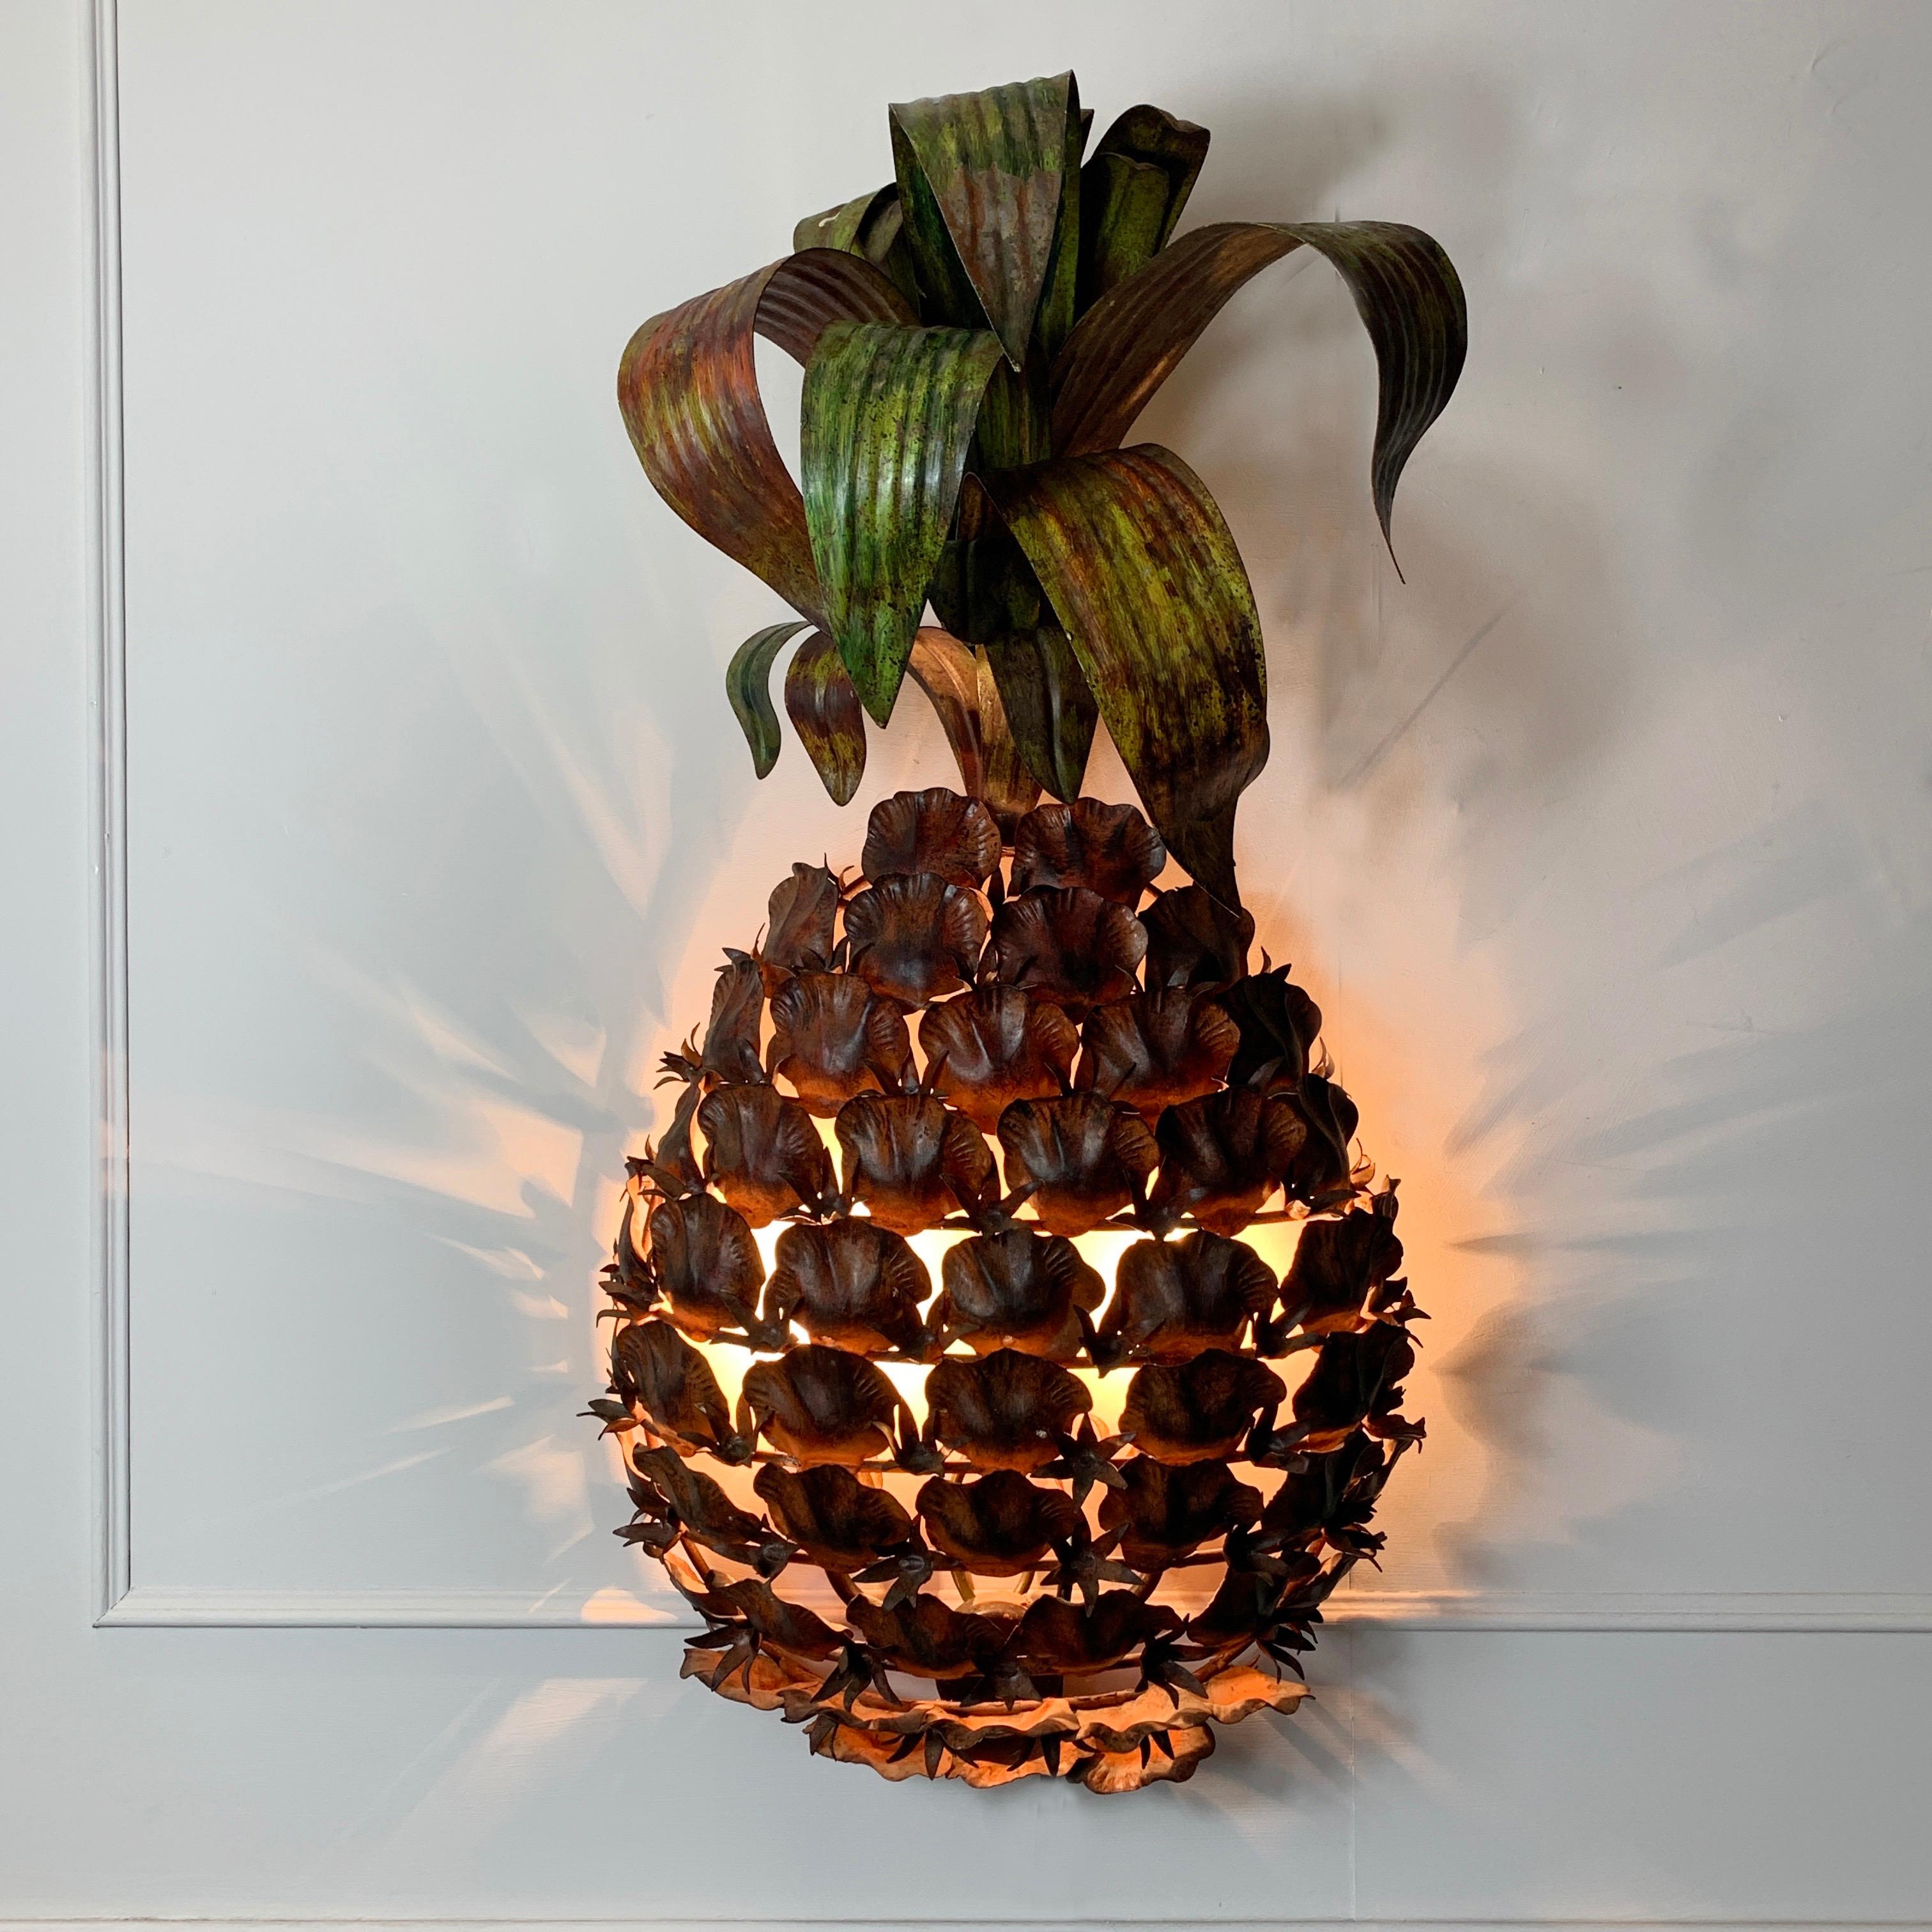 Monumental pineapple wall sconce
Italian/French origin, circa 1960s
Huge metal toleware pineapple wall sconce with 2 bulb holders hidden behind
Individually crafted metal pieces are built up to create the multi brown toned body, adorned with a